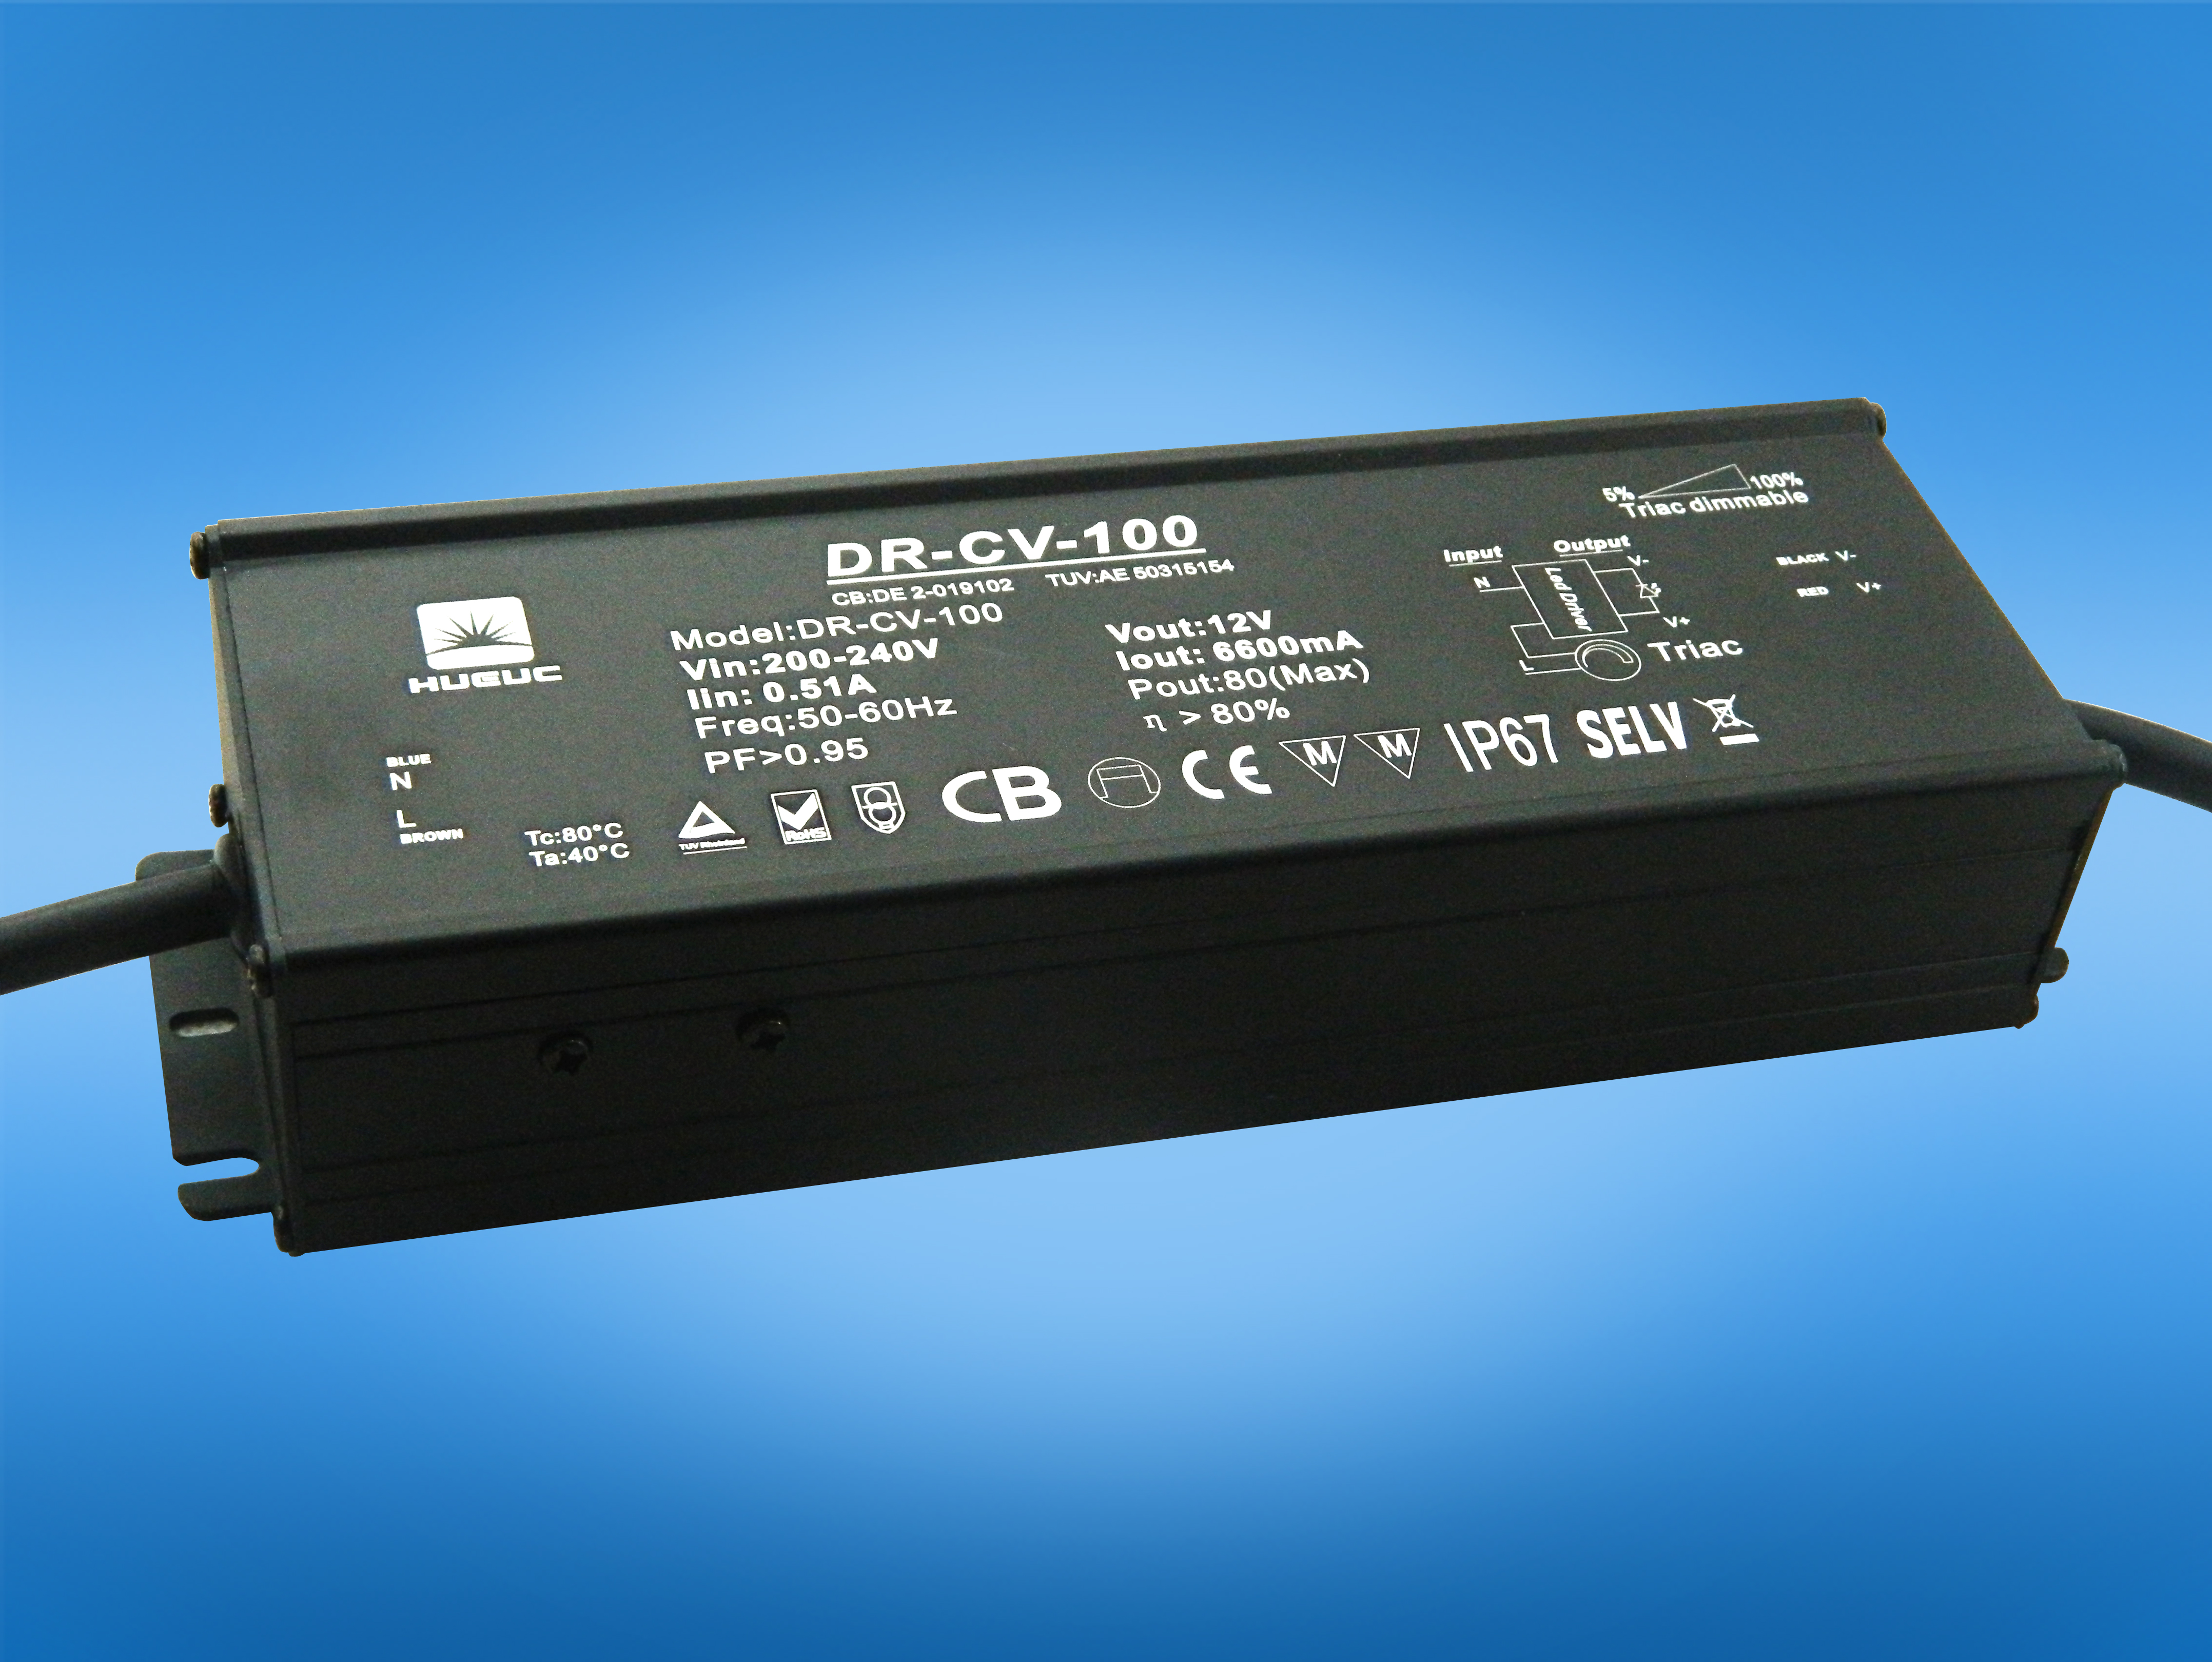 24V 100W 0-10V dimmable Waterproof Power Supply